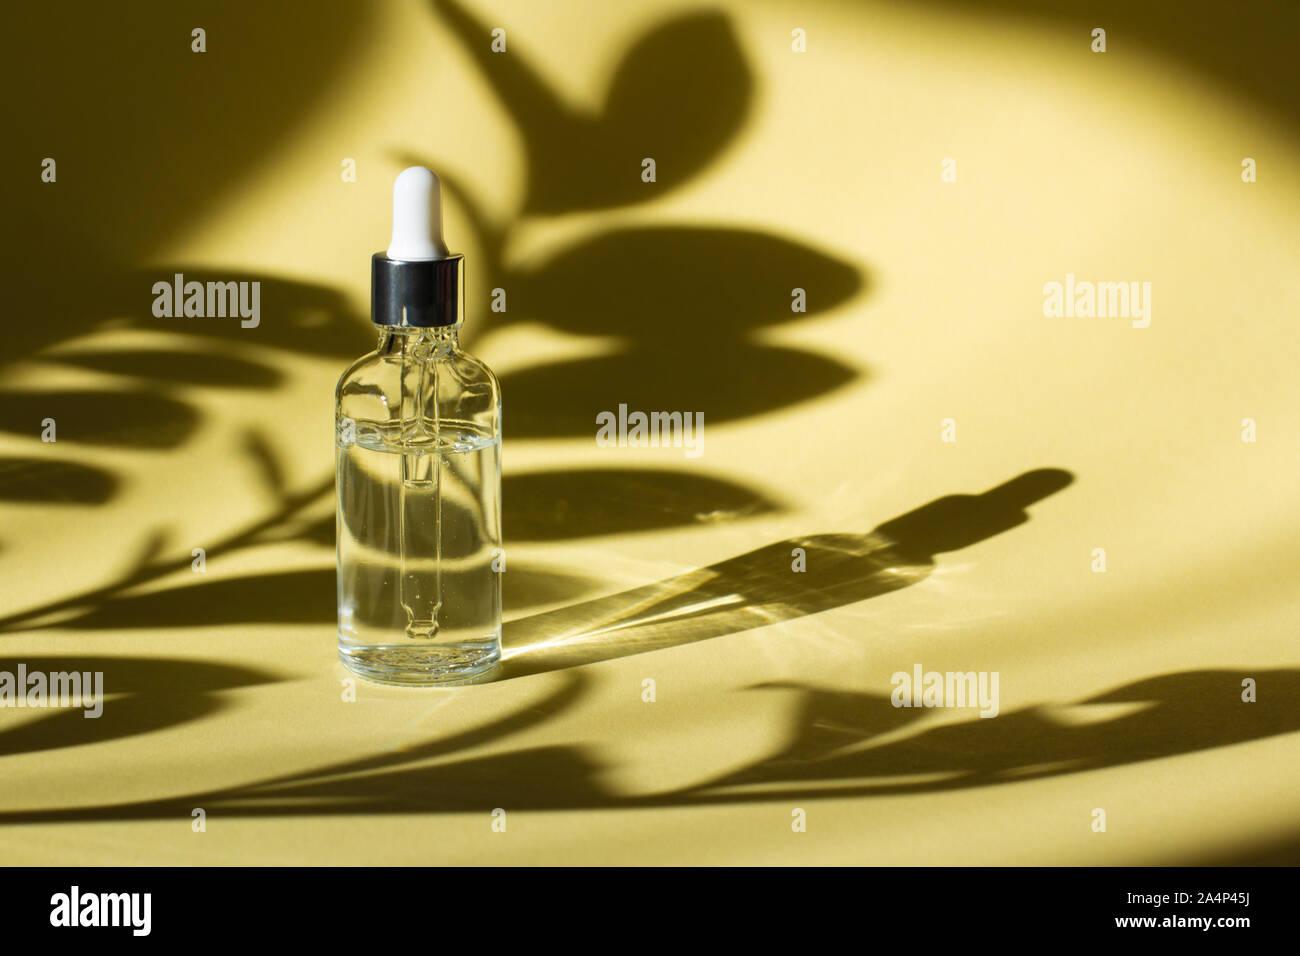 Download Cosmetic Bottle With Pipette Transparent Liquid Product In Glass Bottle With Dropper Serum Skin Care On Light Yellow Background And Plant Shadows Front View With Copy Space Beauty Product Mockup Stock Photo